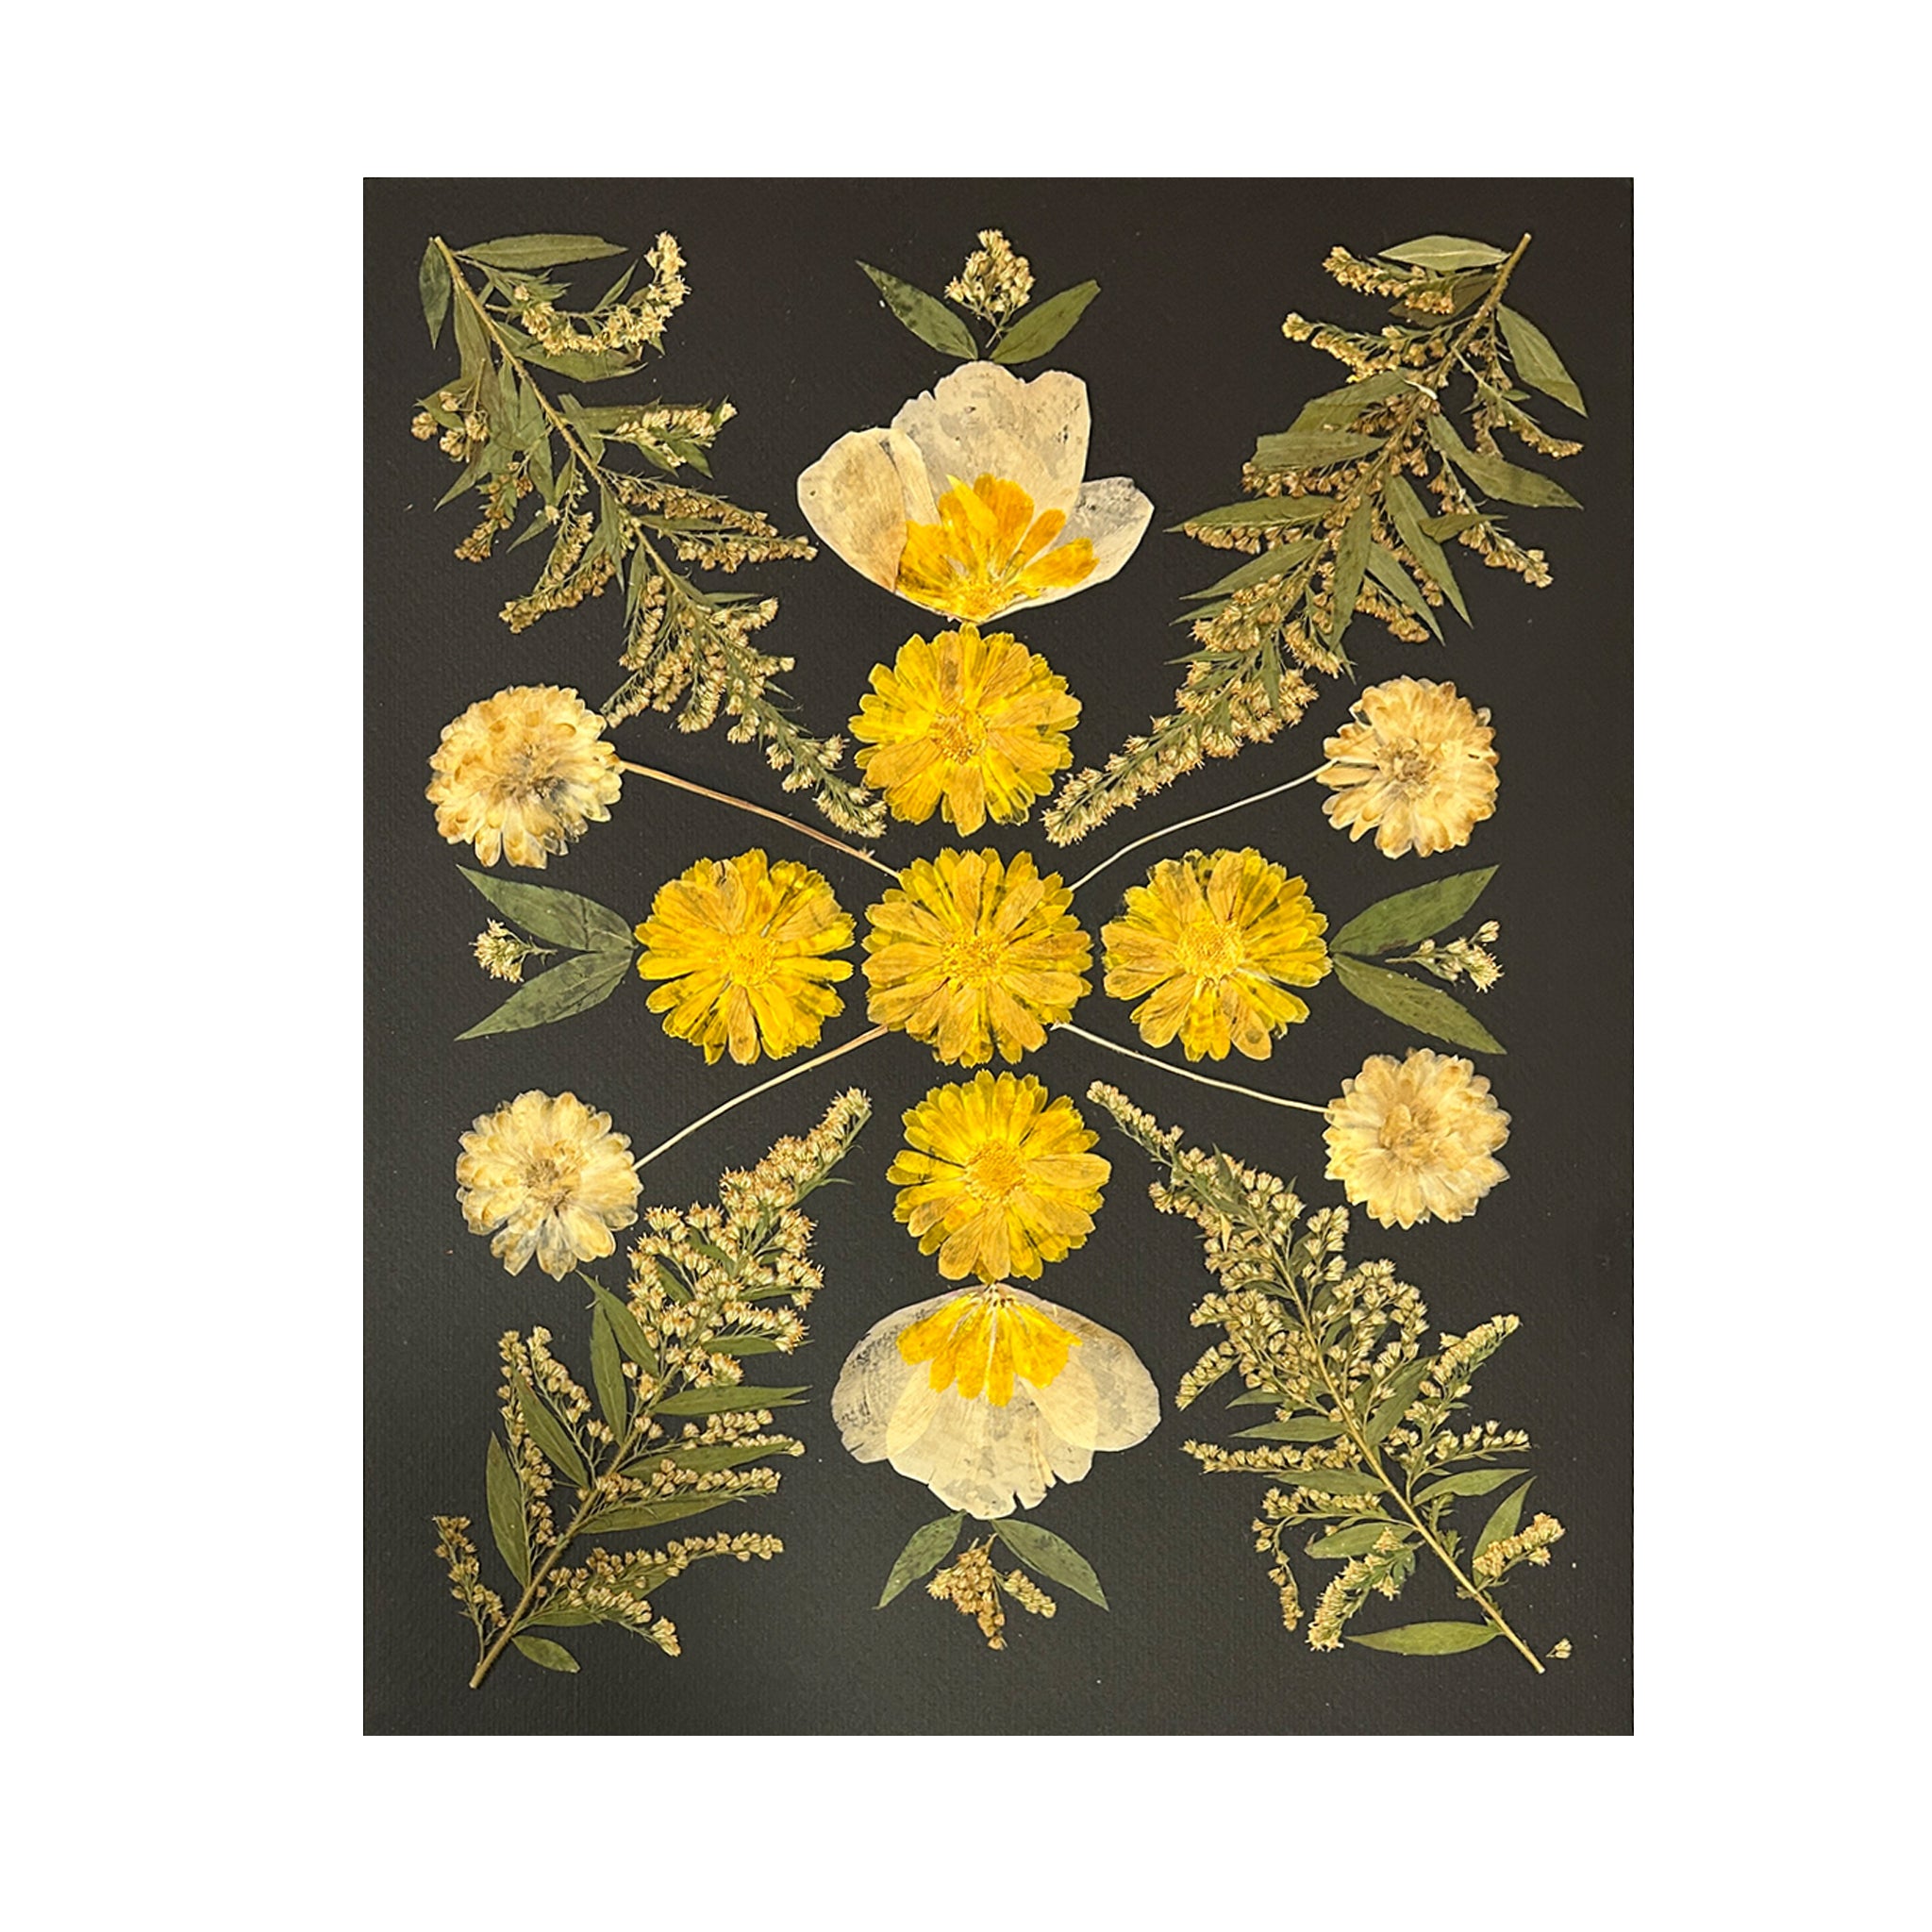 Marian McEvoy, Marigolds, Hibiscus Petals and Goldenrod Collage